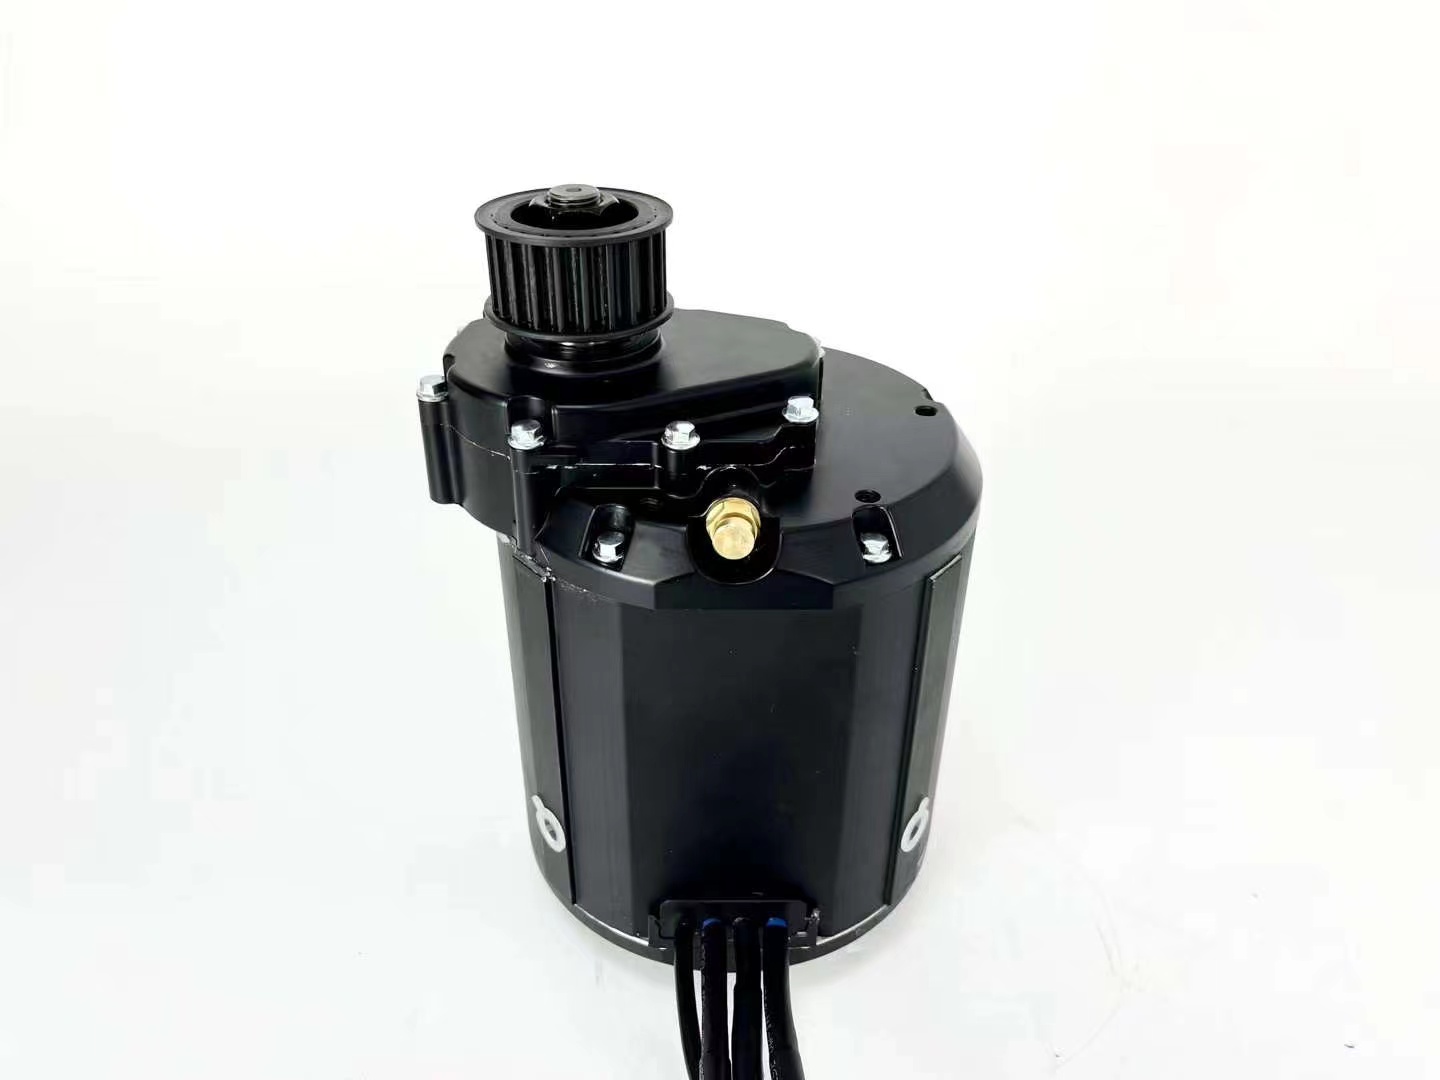 New Arrival- QS138 90H V3 4000W Internal gearbox Mid-drive Motor Water cooling type